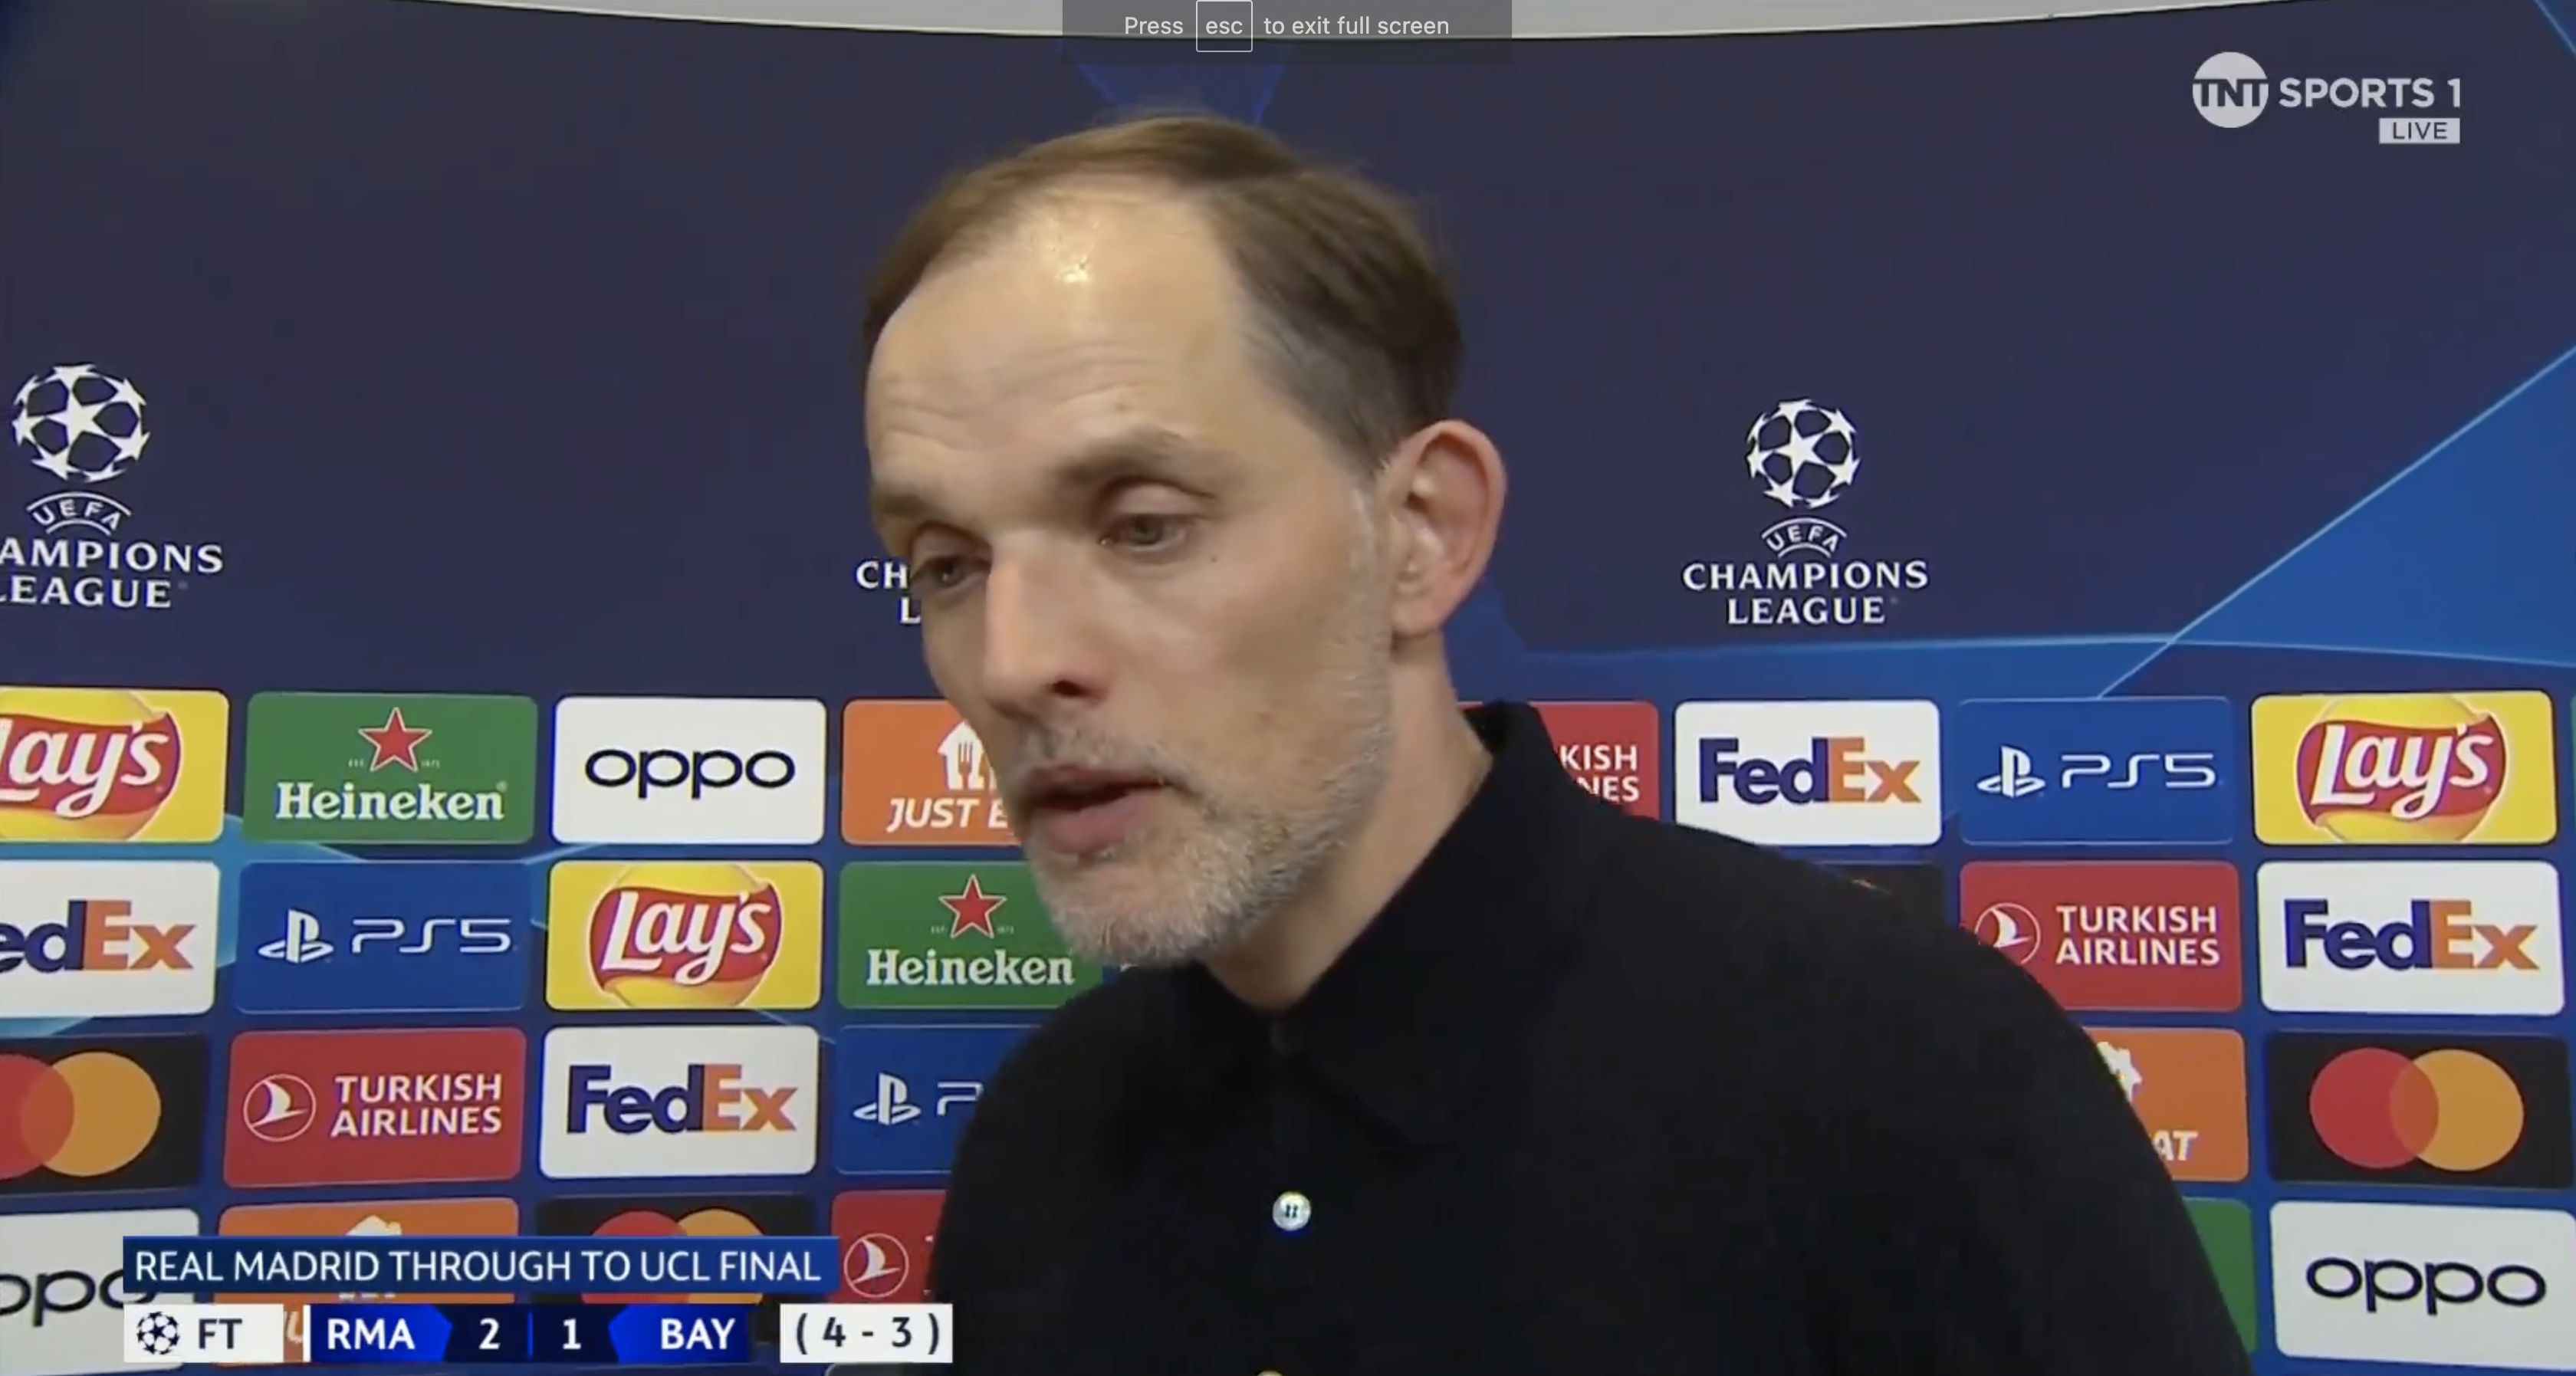 Thomas Tuchel slams officials over “disastrous” decision to disallow late Bayern Munich goal